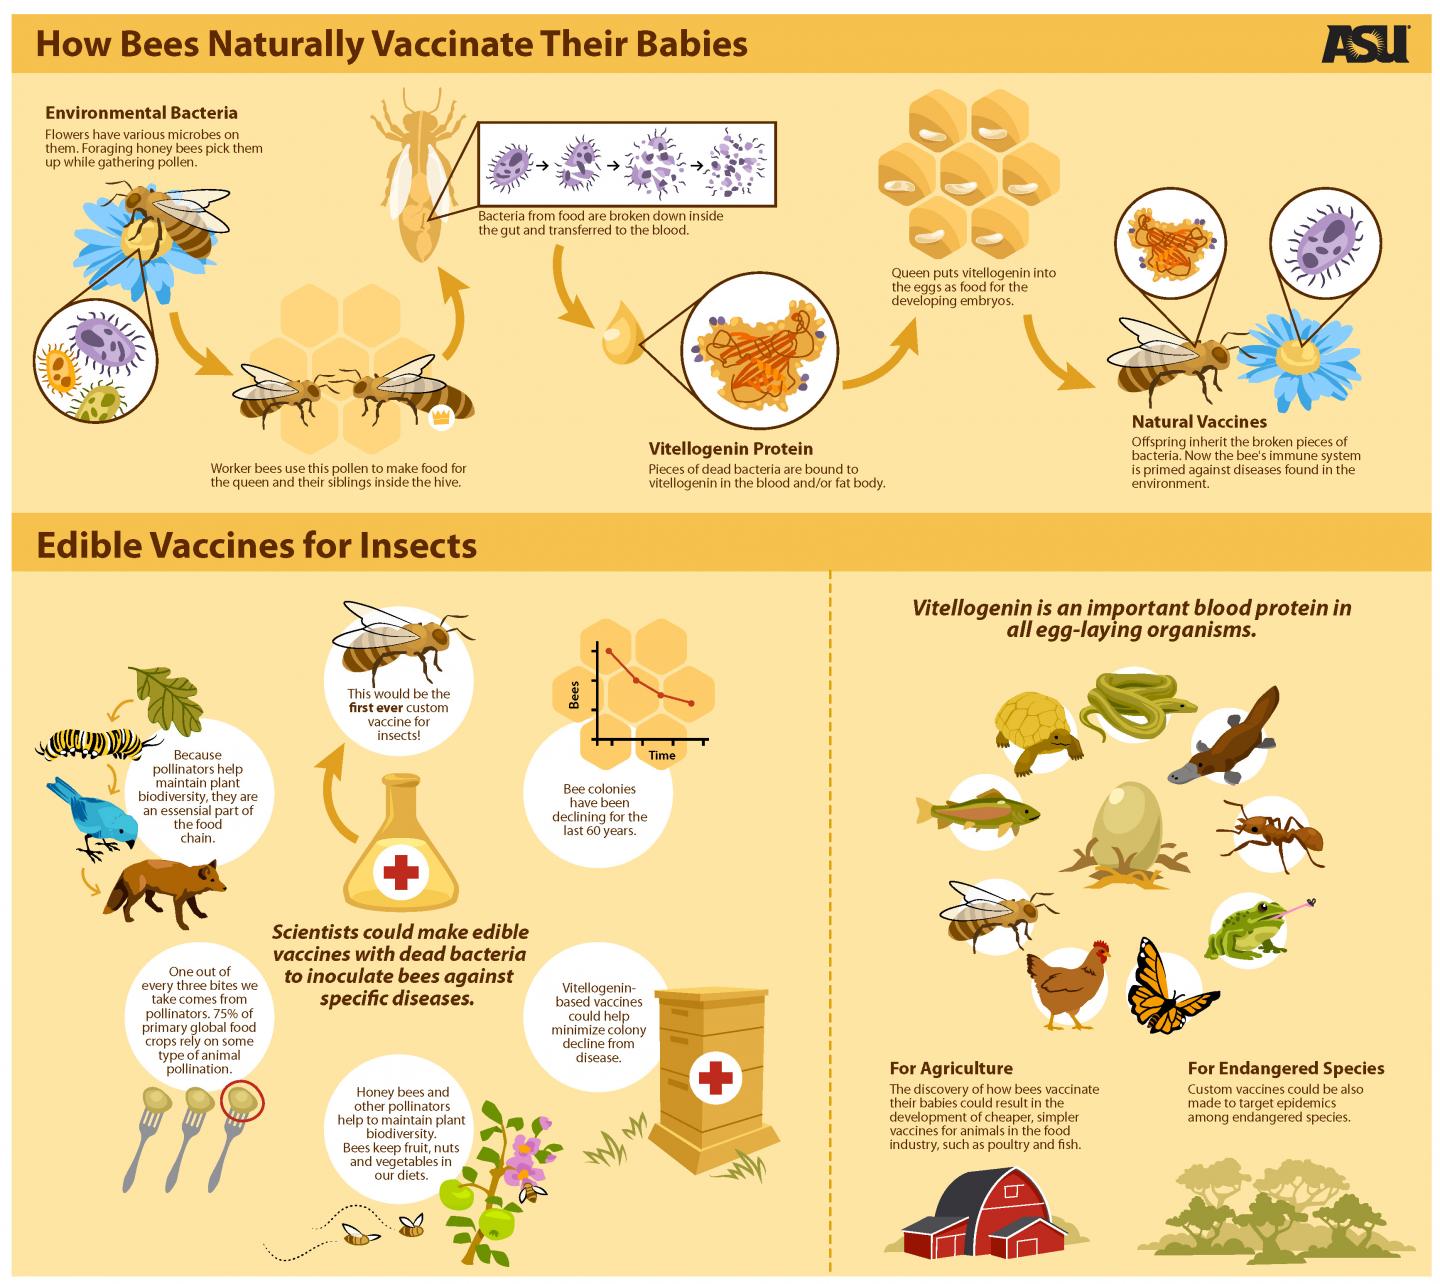 How Bees Naturally Vaccinate Their Babies